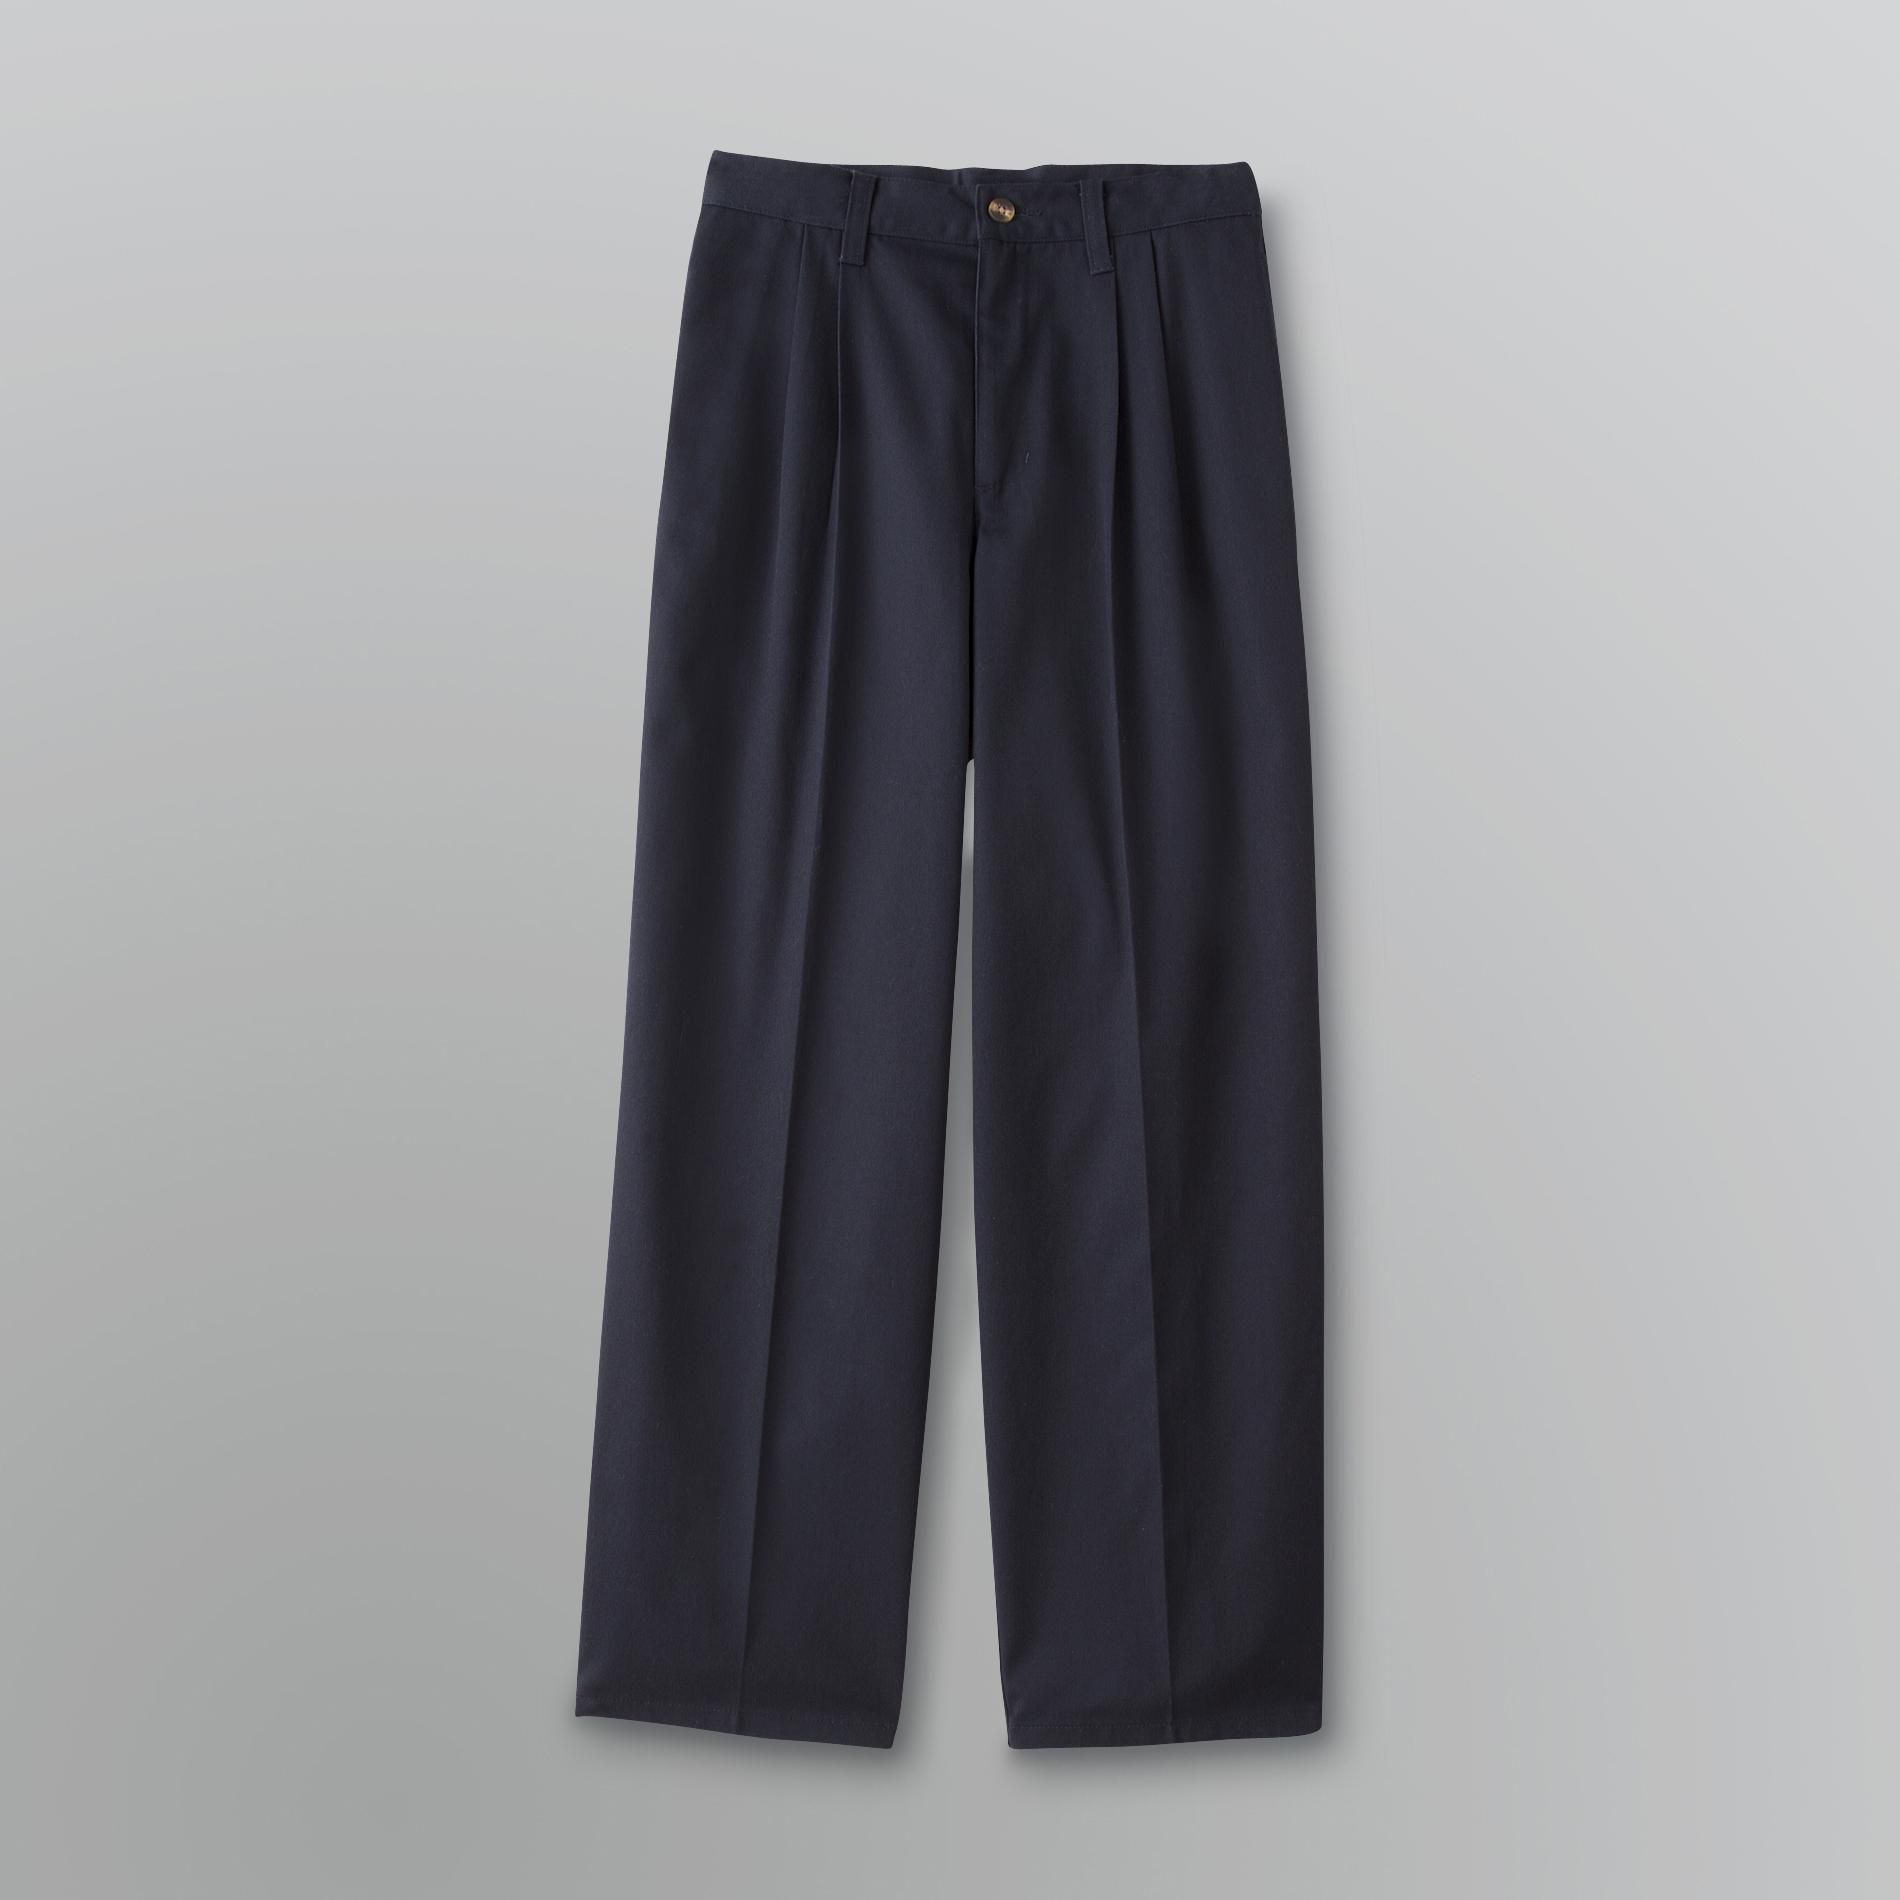 Basic Editions Boy's Pleated Twill Pants